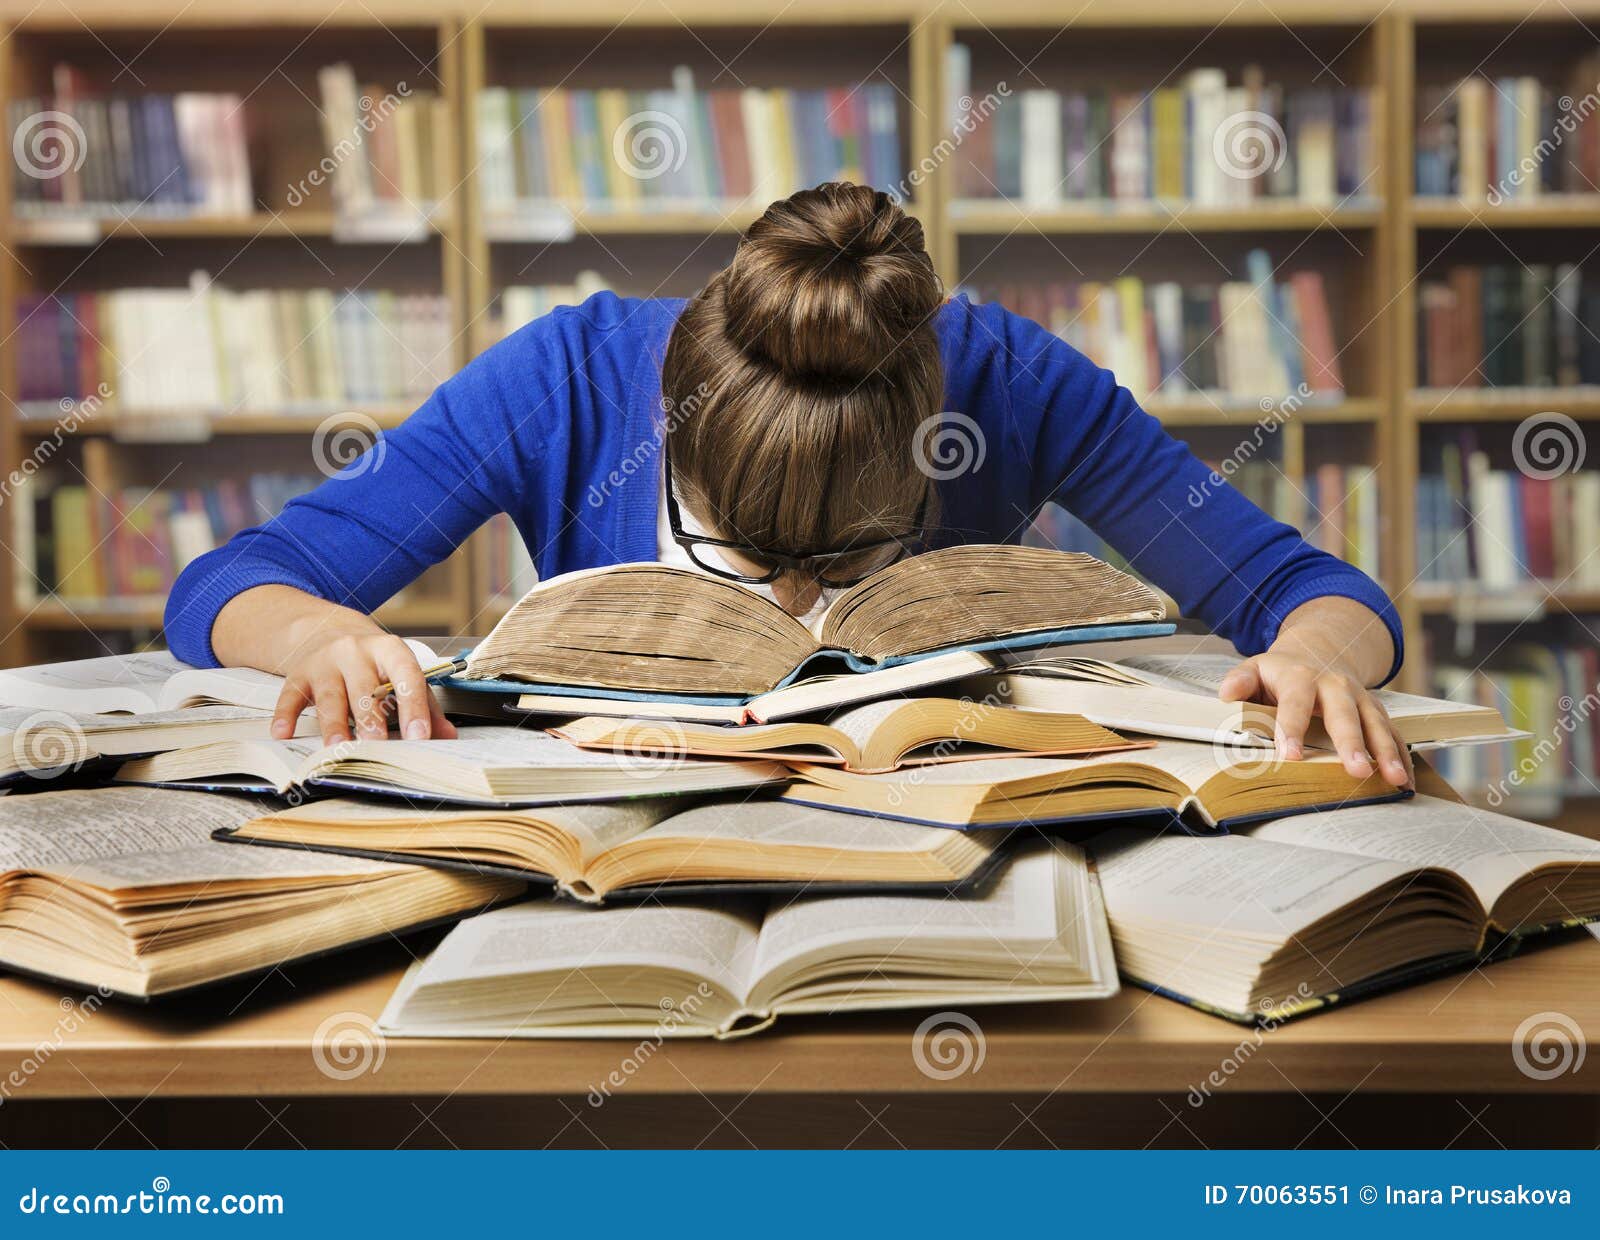 Student Studying, Sleeping on Books, Tired Girl Read in Library Stock Image  - Image of educate, knowledge: 70063551